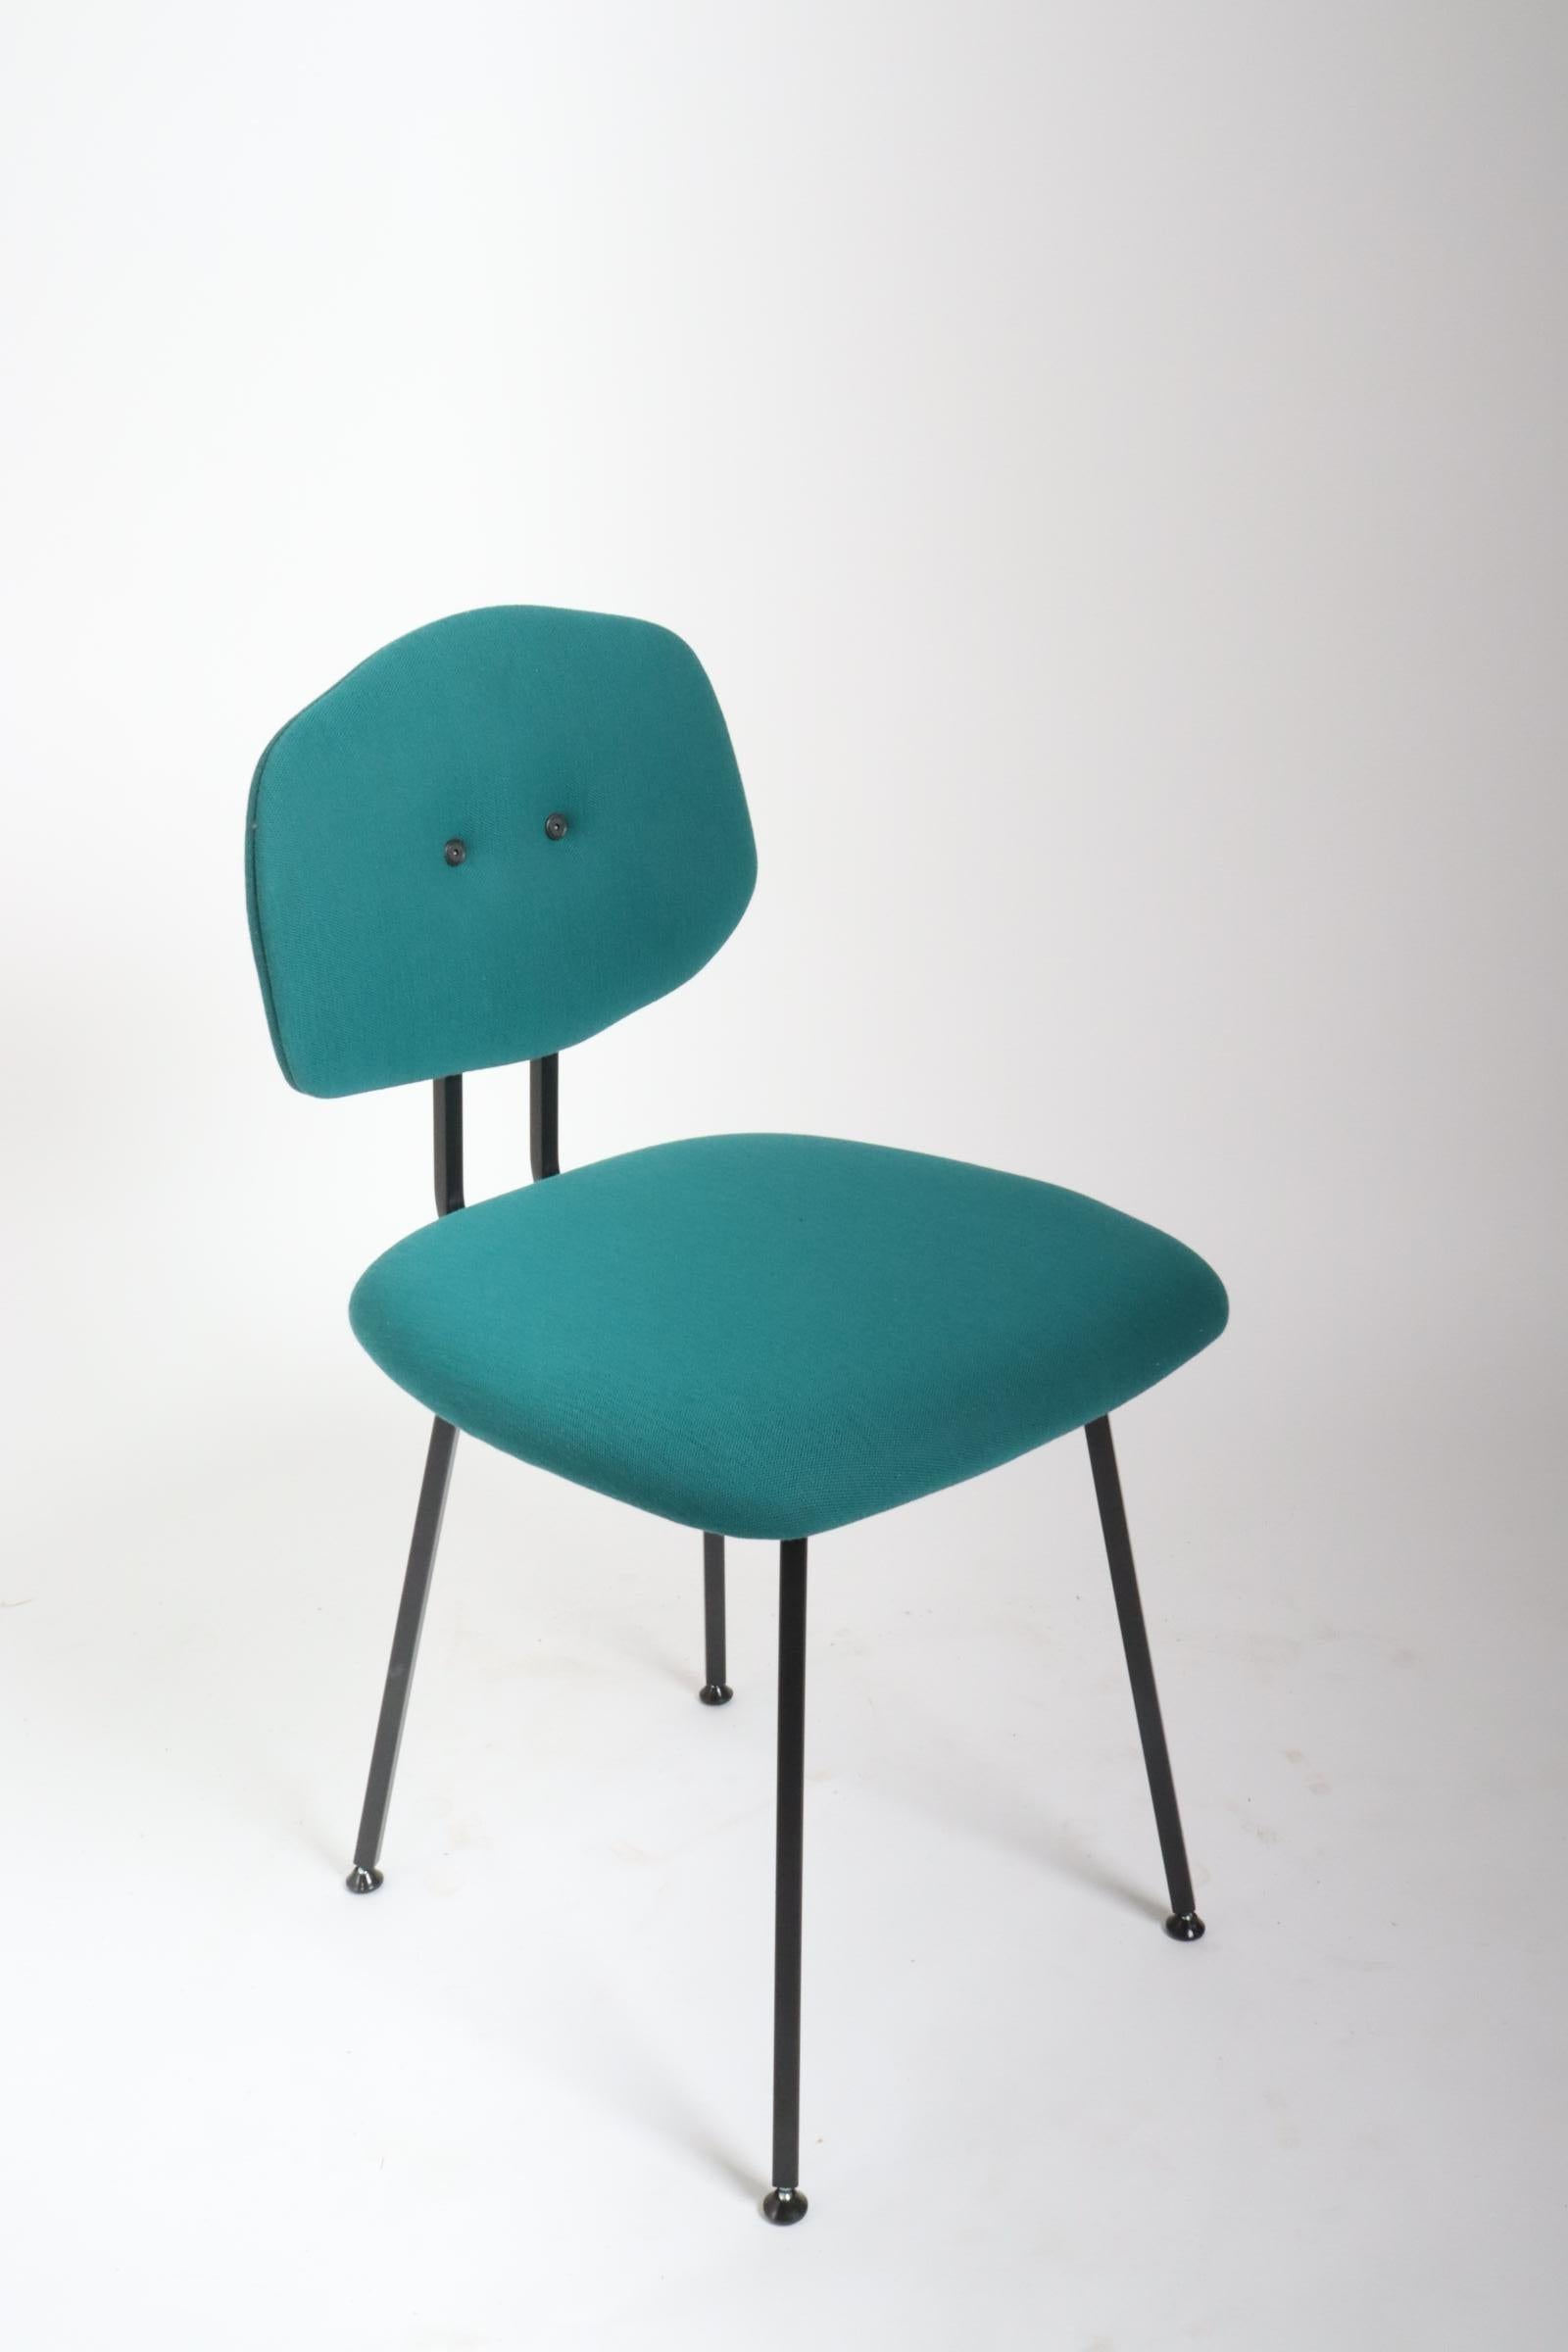 Maarten Baas 101 Chair Upholstered Kvadrat NITTO 0857

The 101 chair designed by Maarten Baas for Lensvelt. The chairs are available in 8 differently shaped backrests, classified A to H. In the fabric selection menu below, each model can be chosen